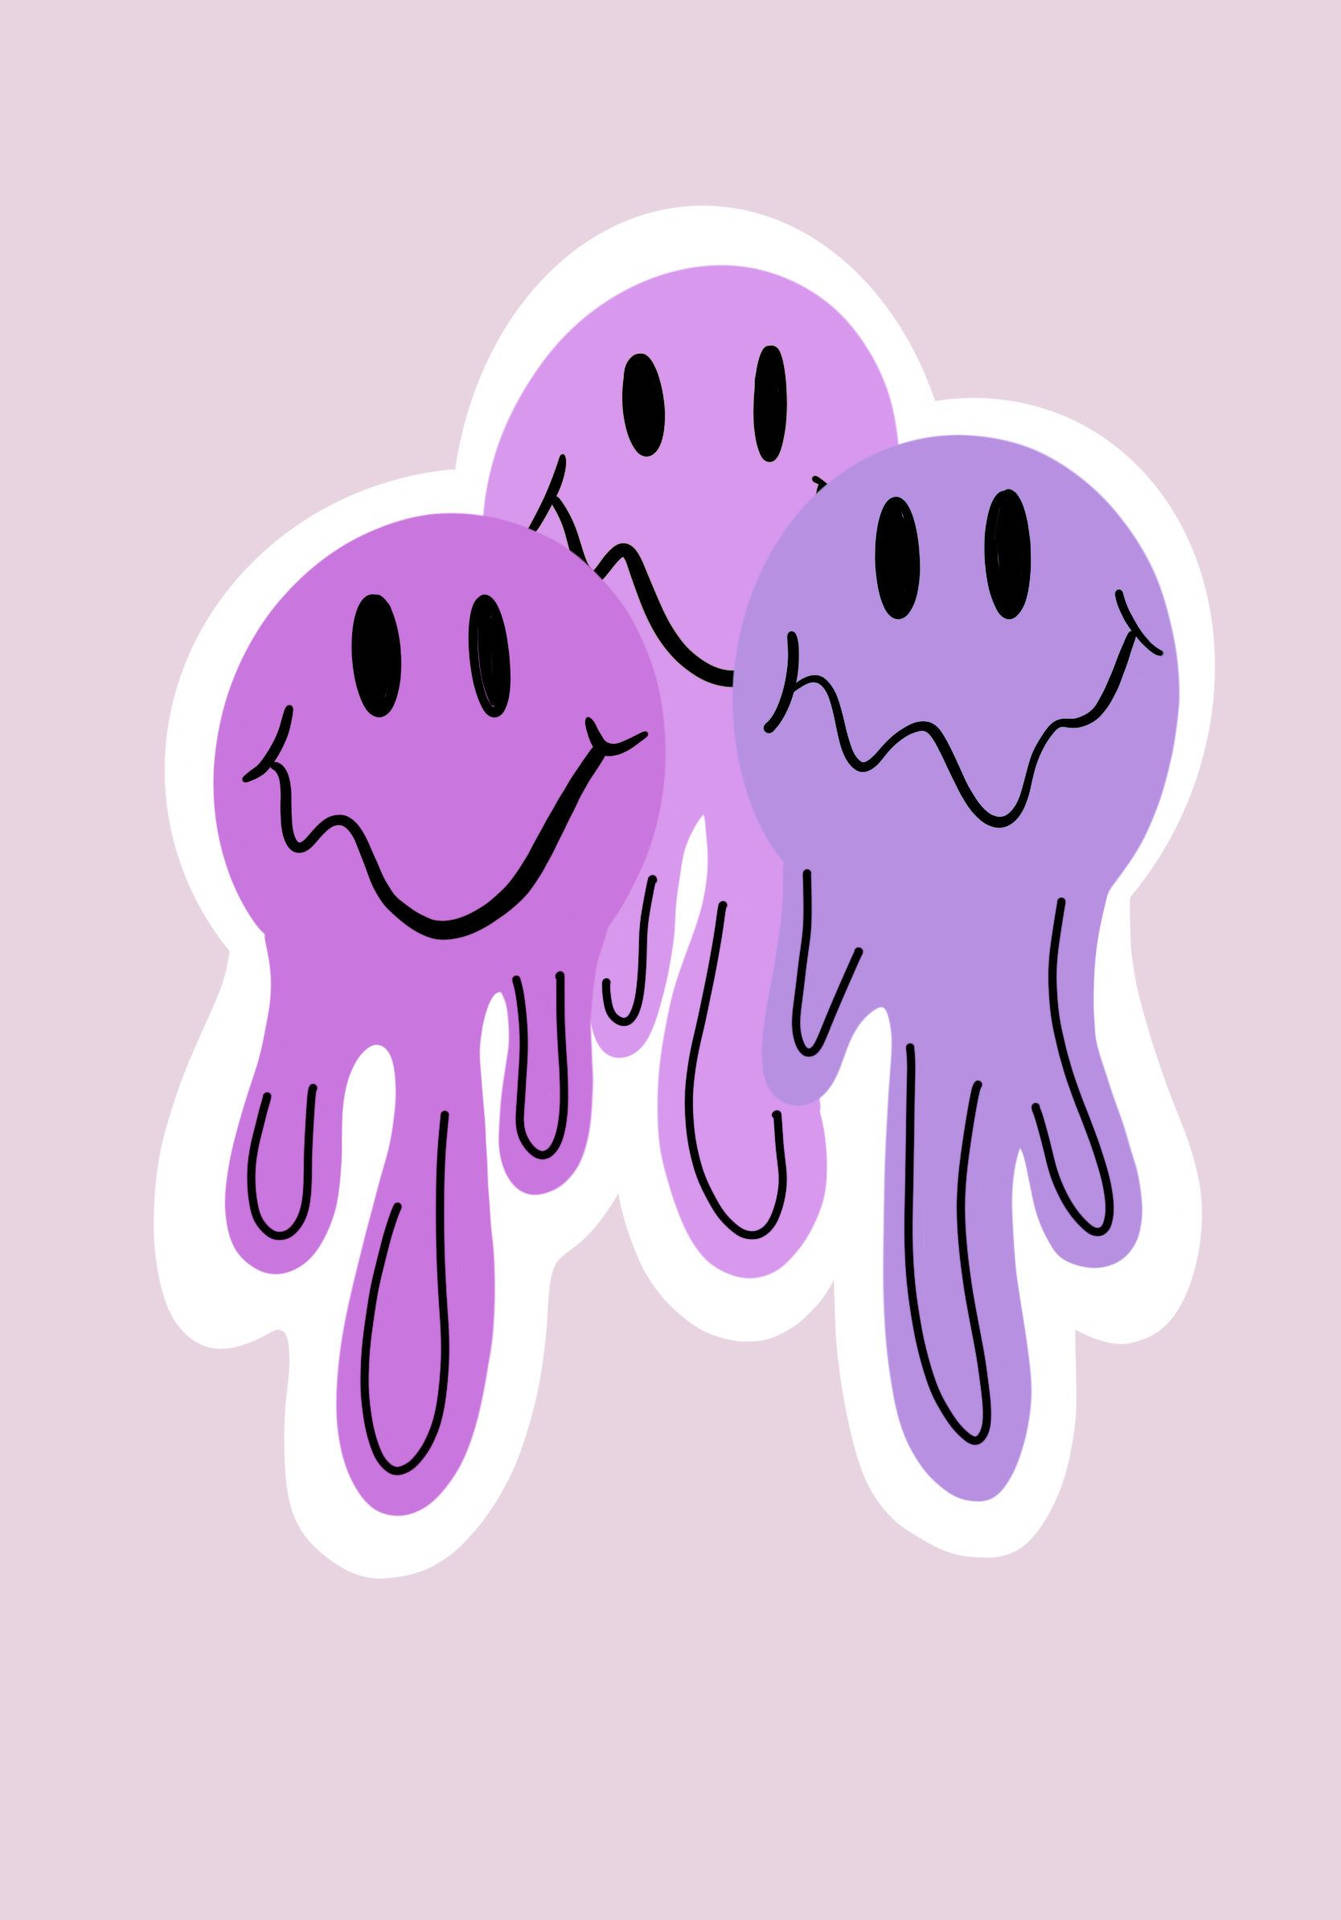 Preppy Smiley Face Dripping Violets Wallpaper